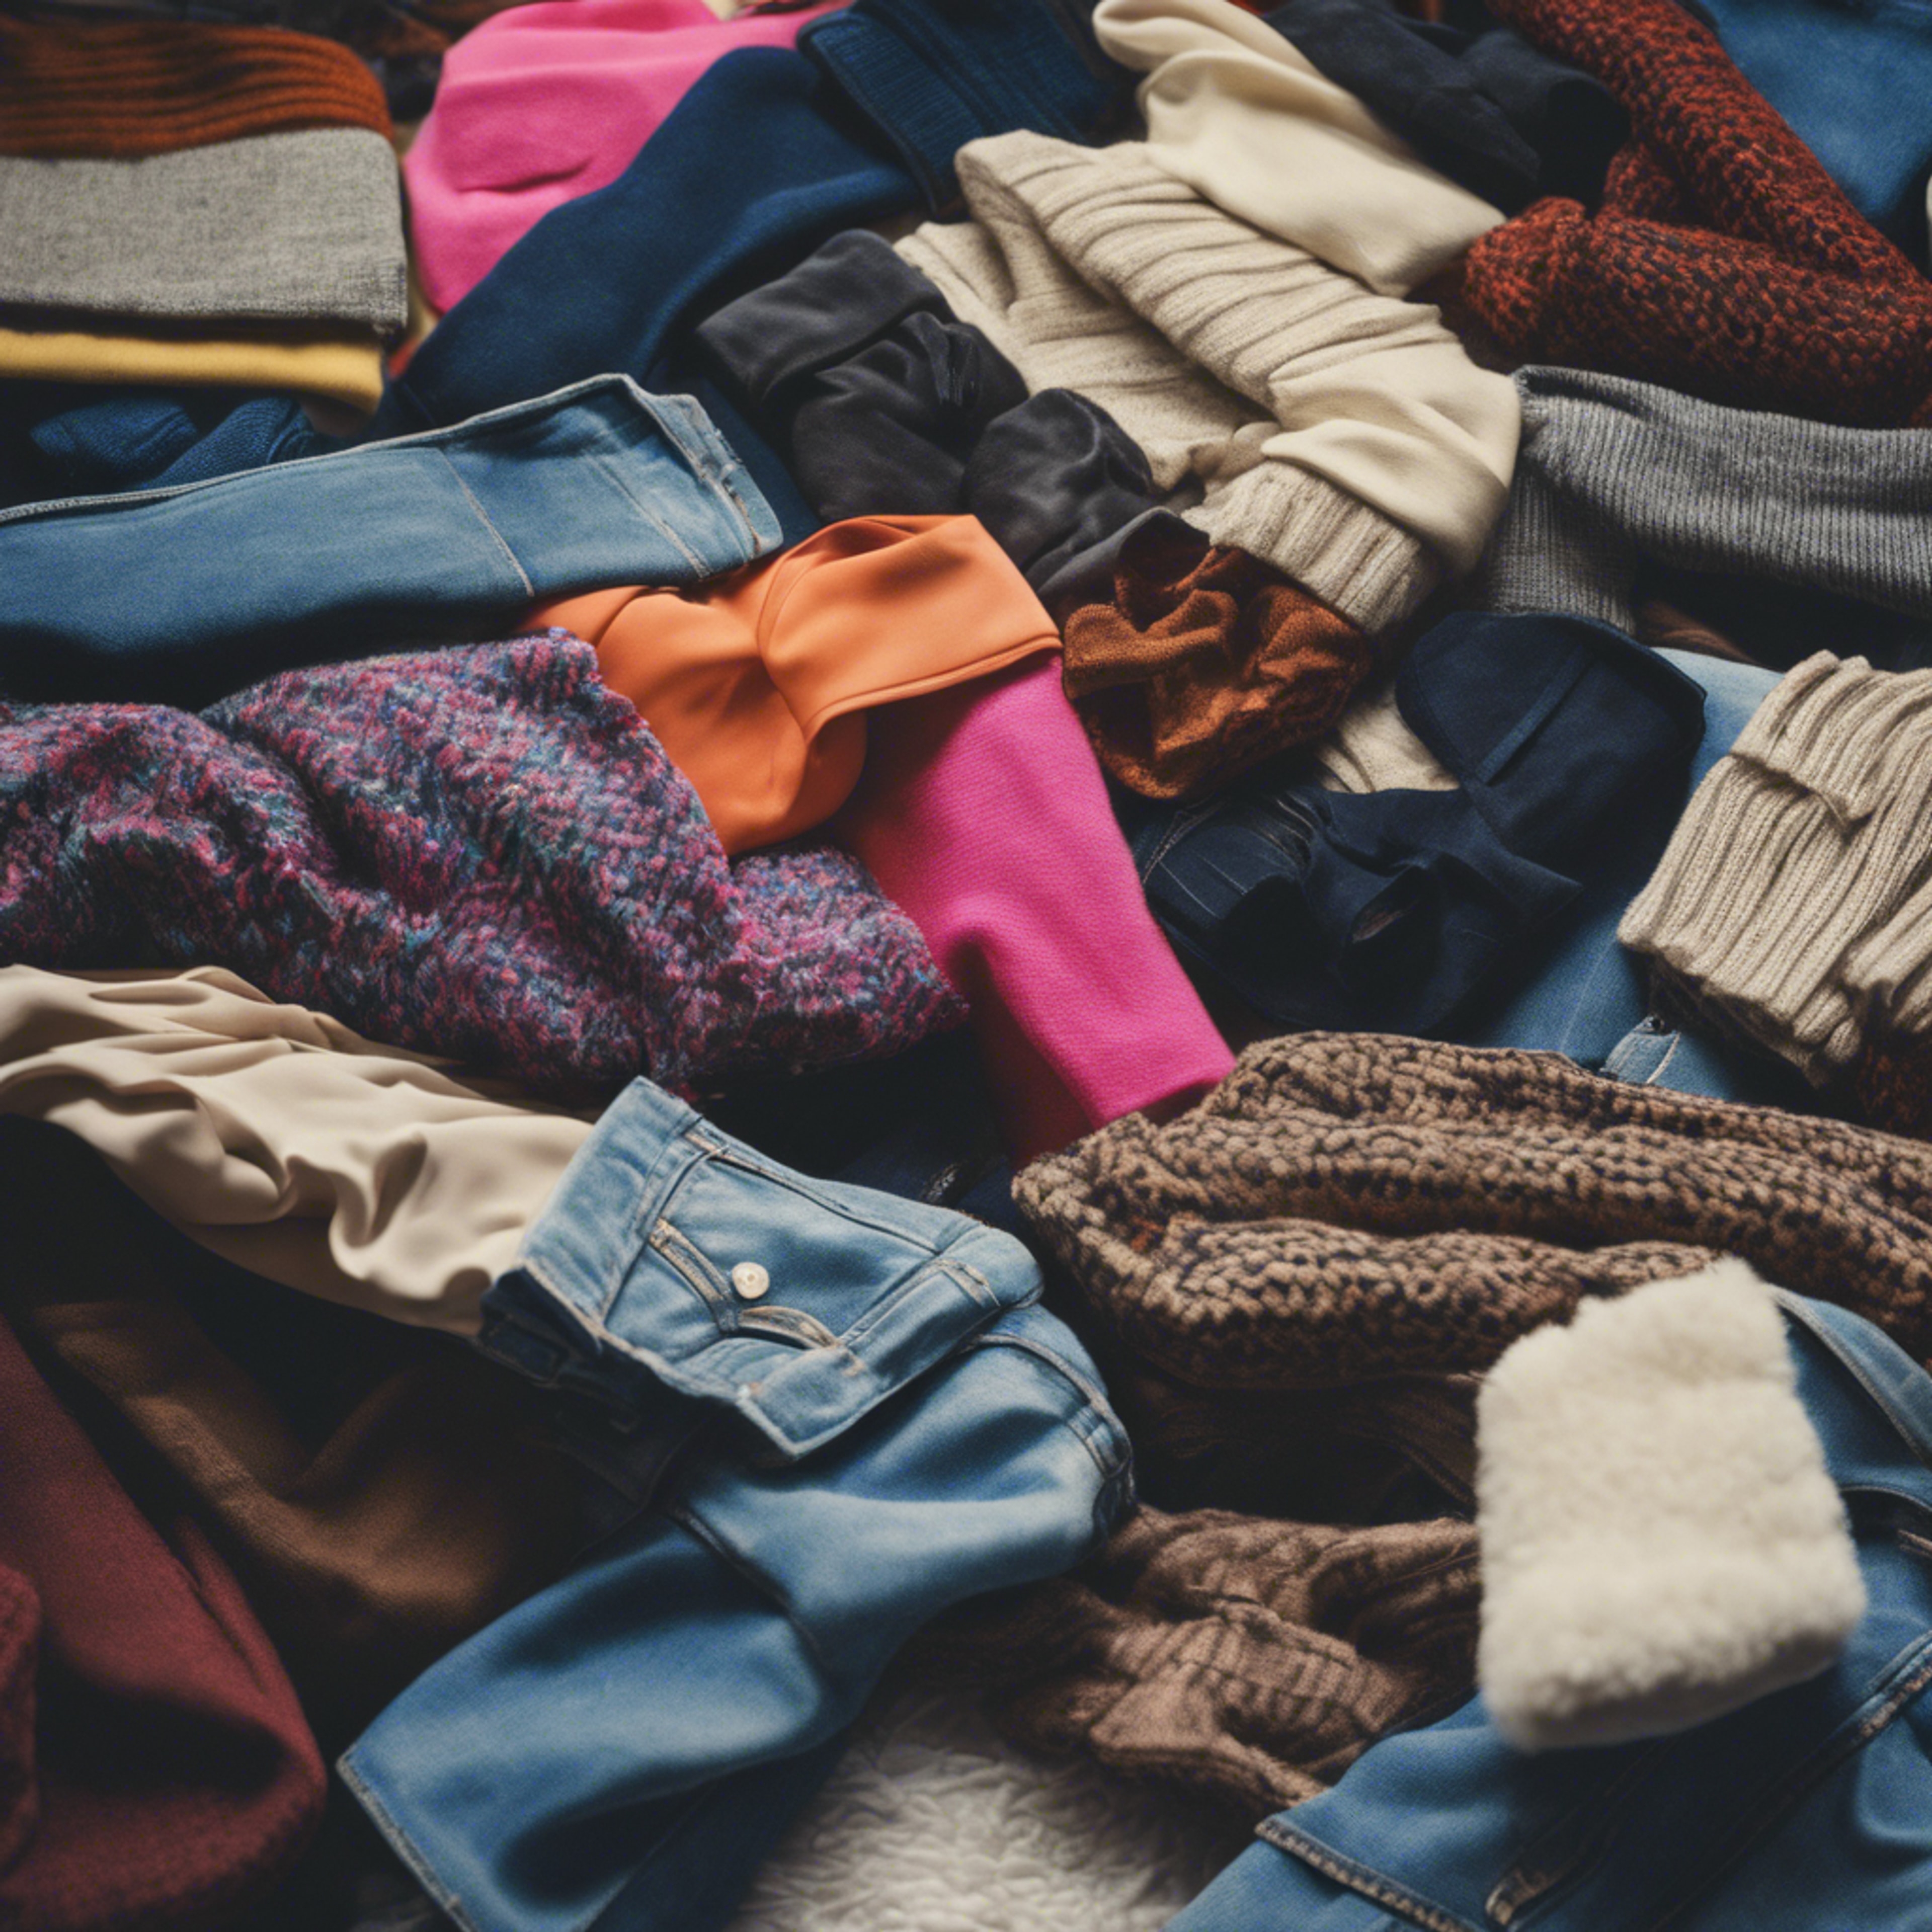 A pile of iconic 80s fashions such as leg warmers, oversized blazers, and high-waisted jeans. Tapeet[dbd69f645b7844d6a4c4]